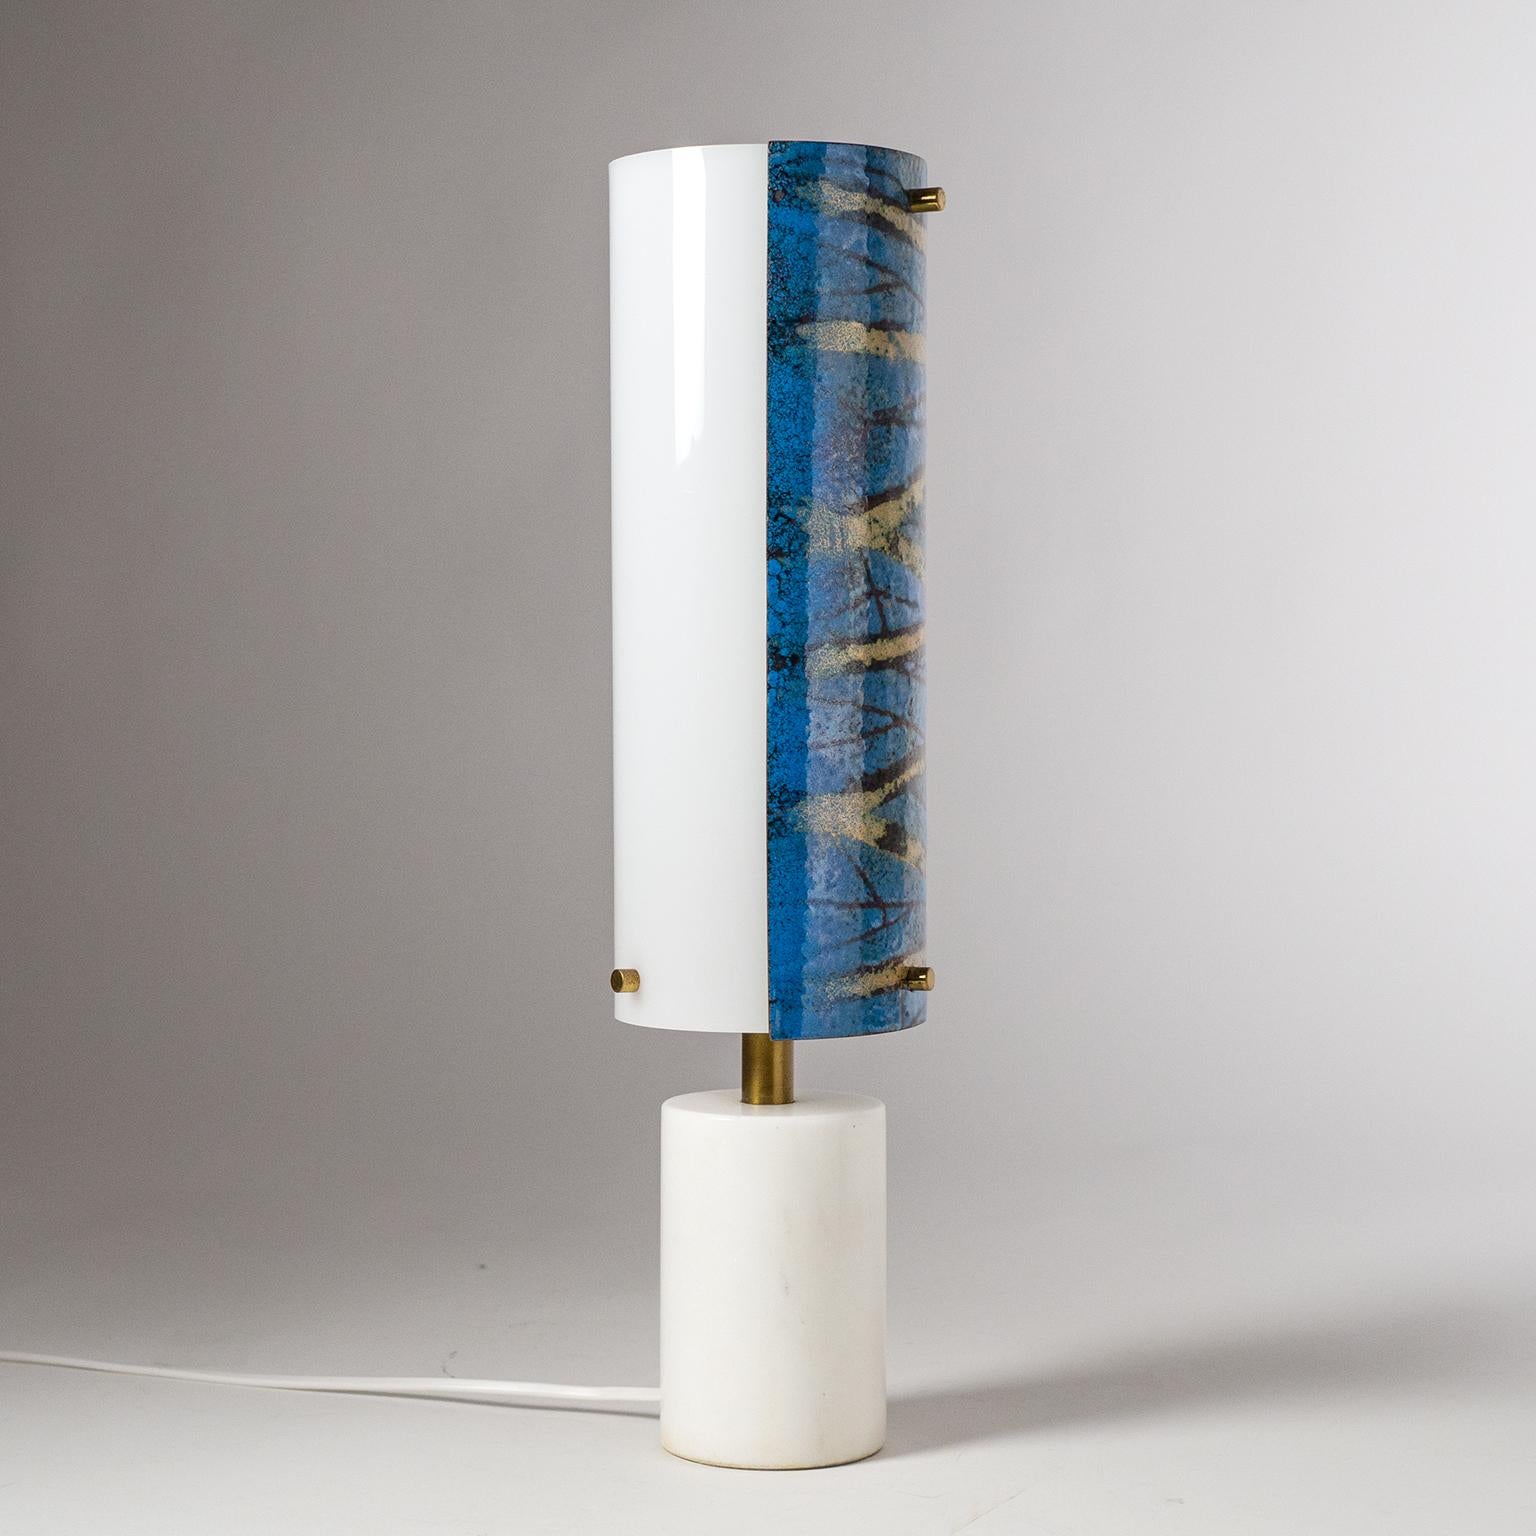 Rare Italian Table Lamp, 1950s, Marble and Enameled Copper  For Sale 5